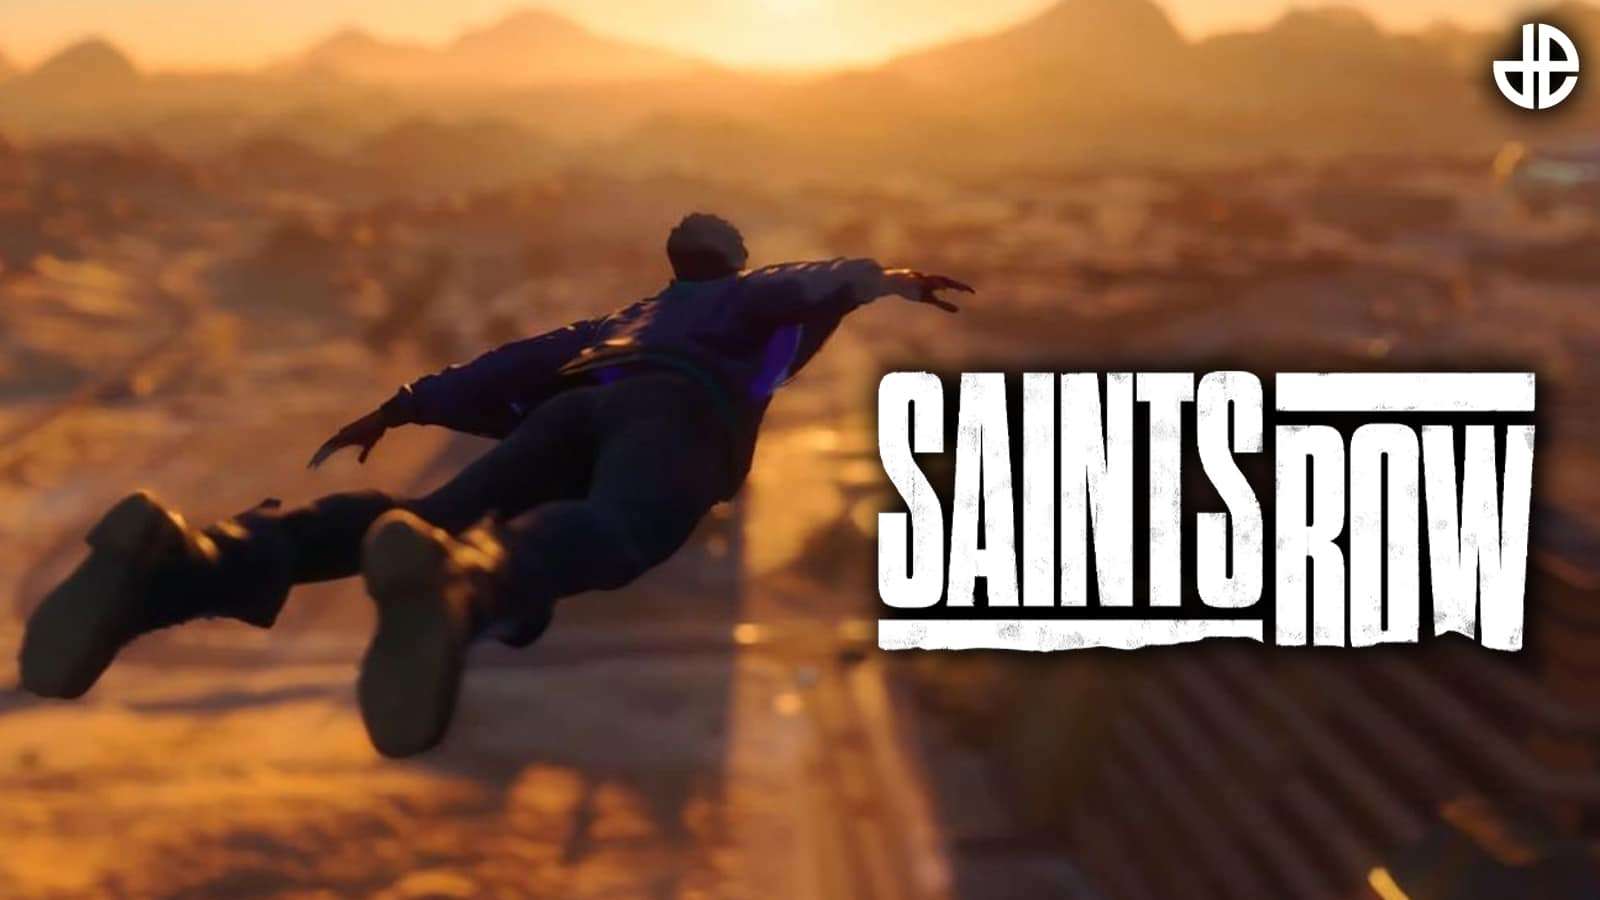 An image of the wingsuit in Saints Row